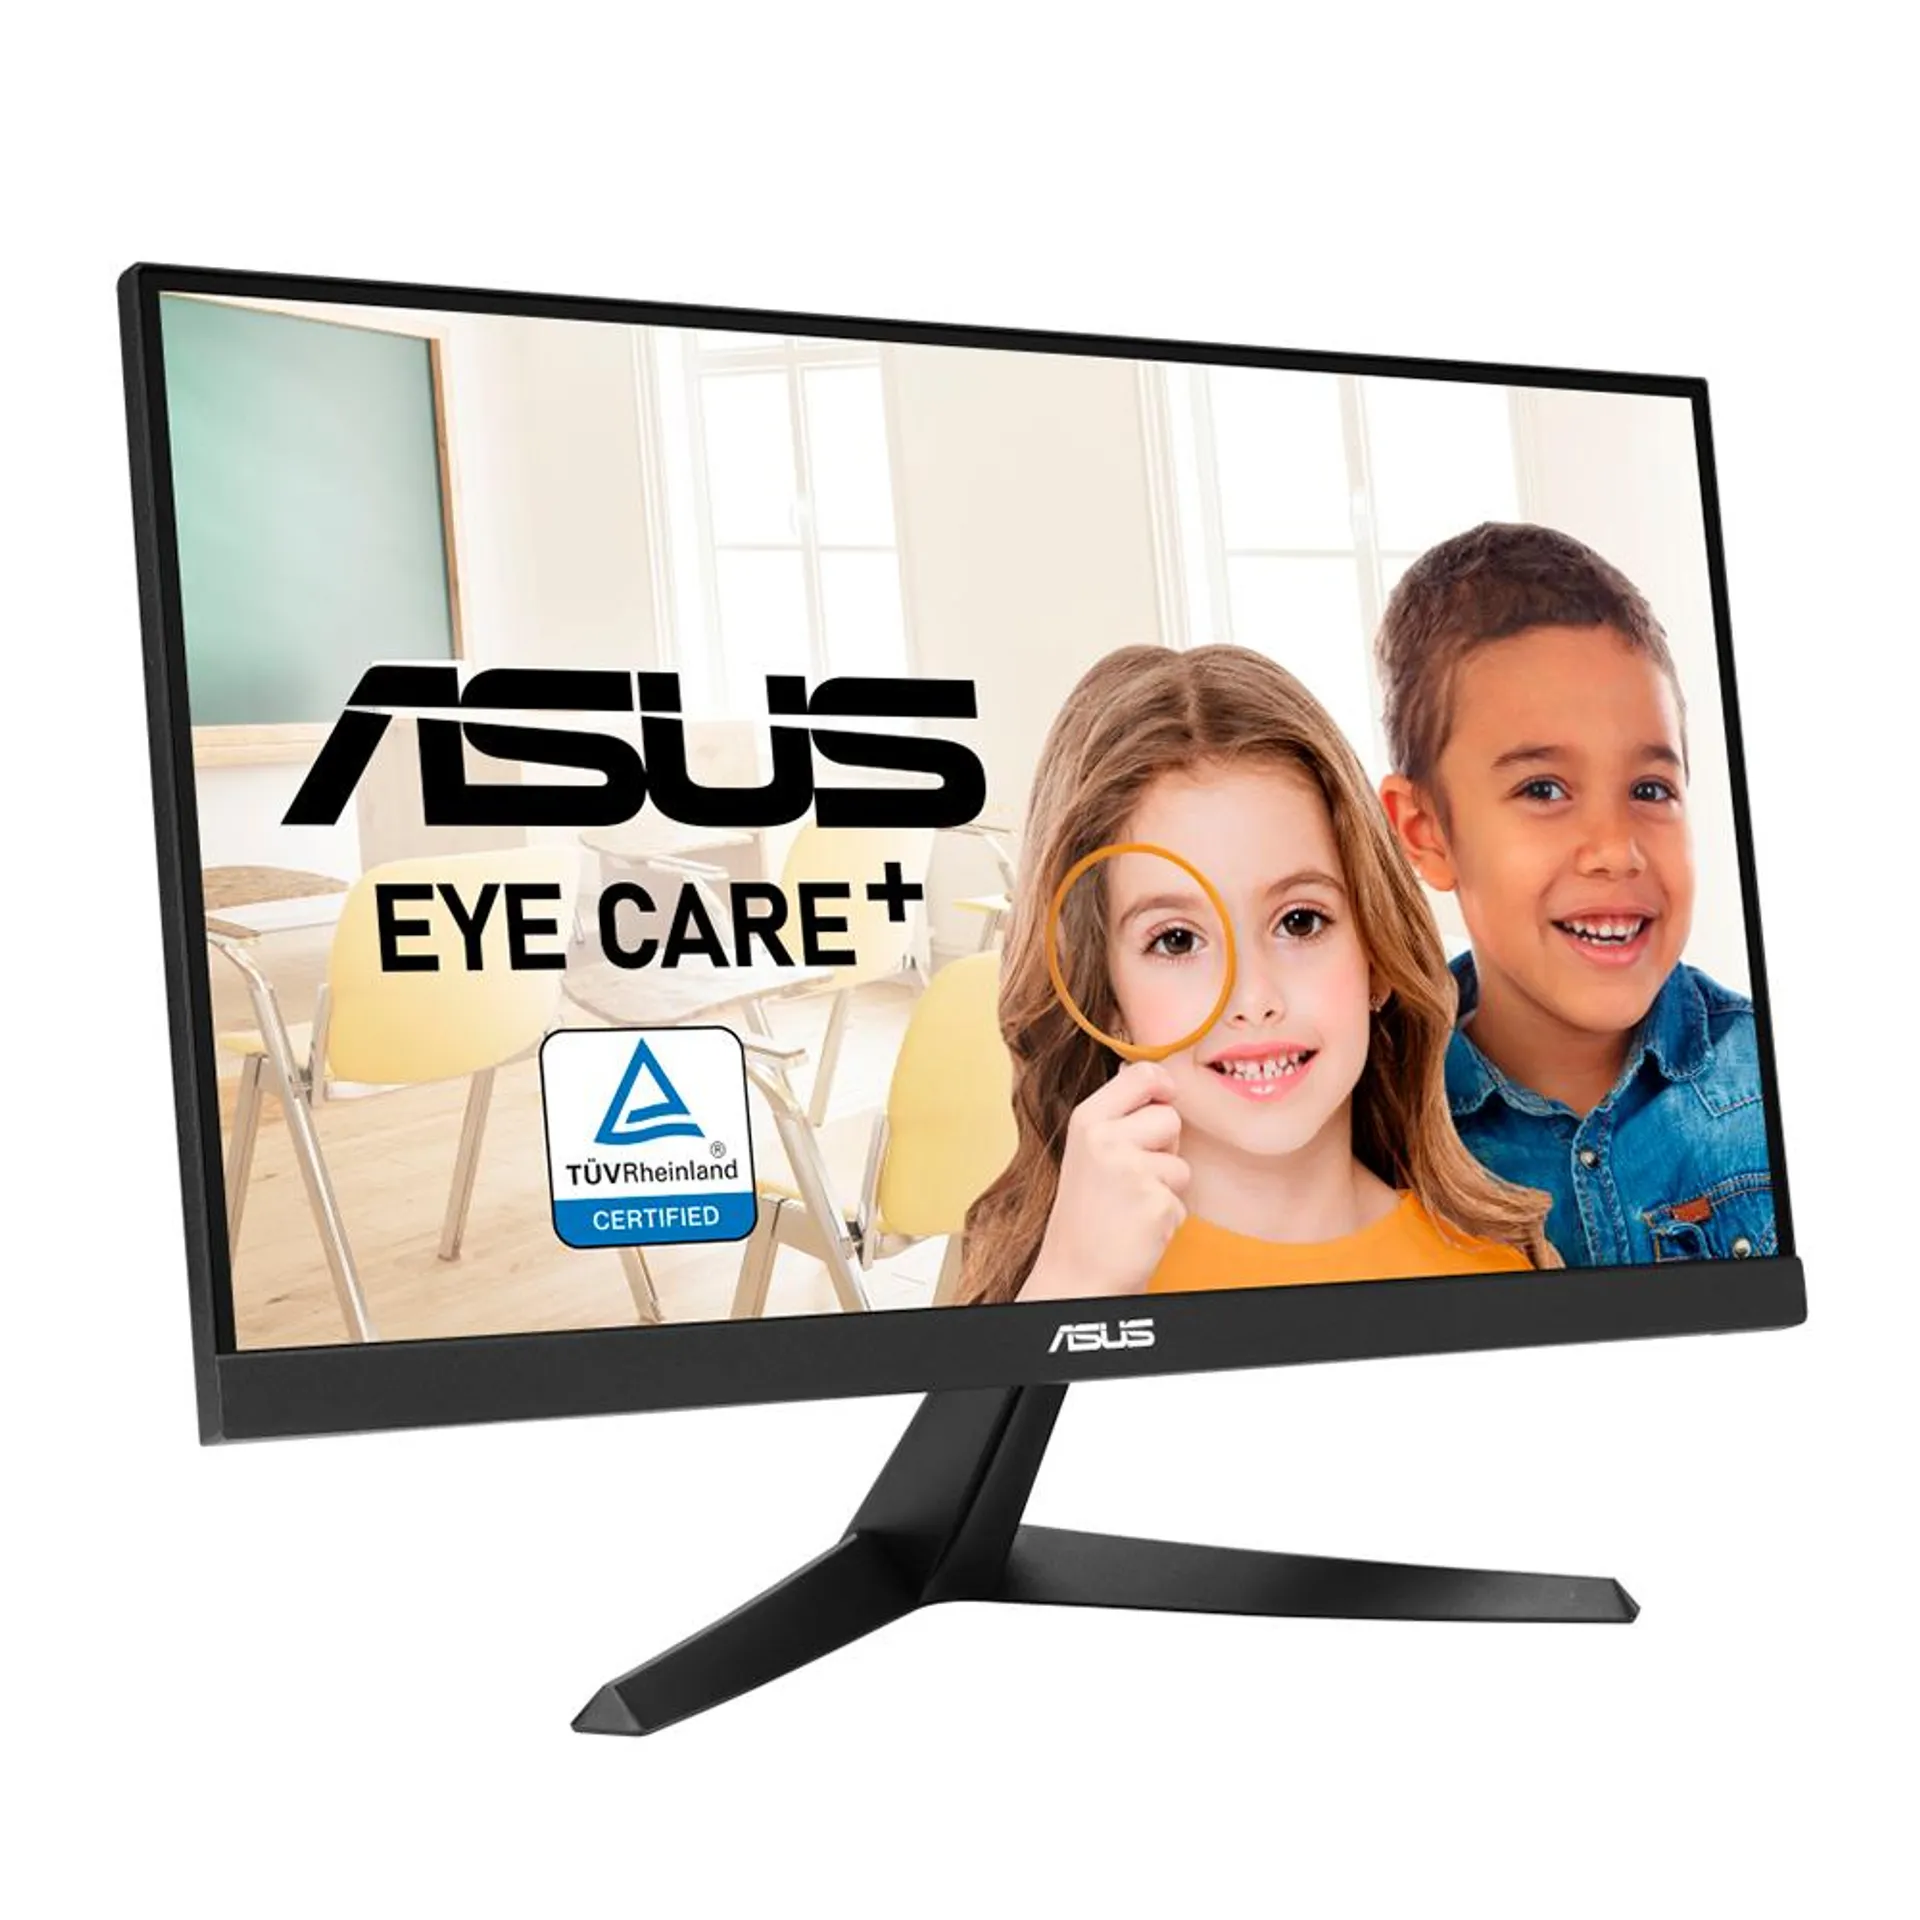 Monitor ASUS VY229HE LED 21.45" / Full HD / FreeSync / 75Hz / HDMI / Negro / VY229HE